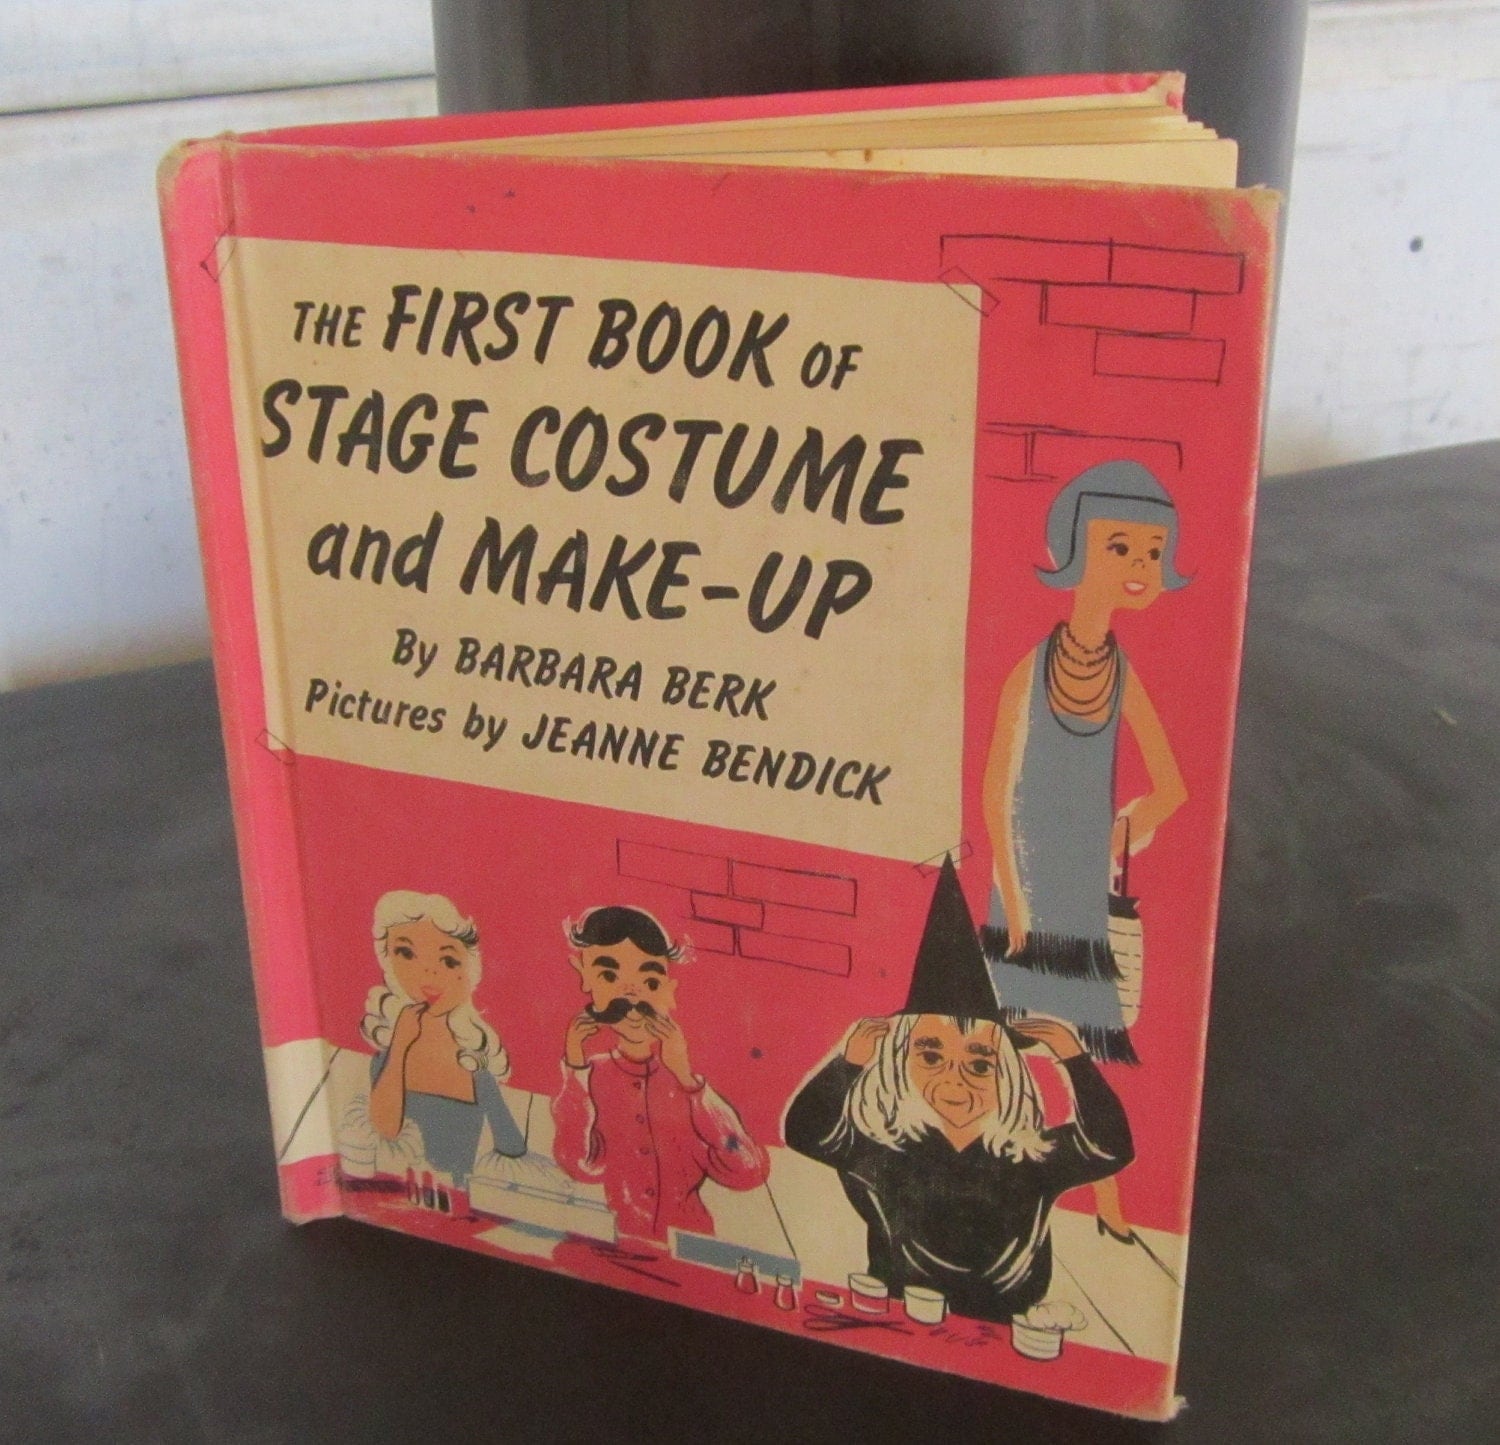 Stage Costume and Make-Up (The First Book of Series) Barbara Berk